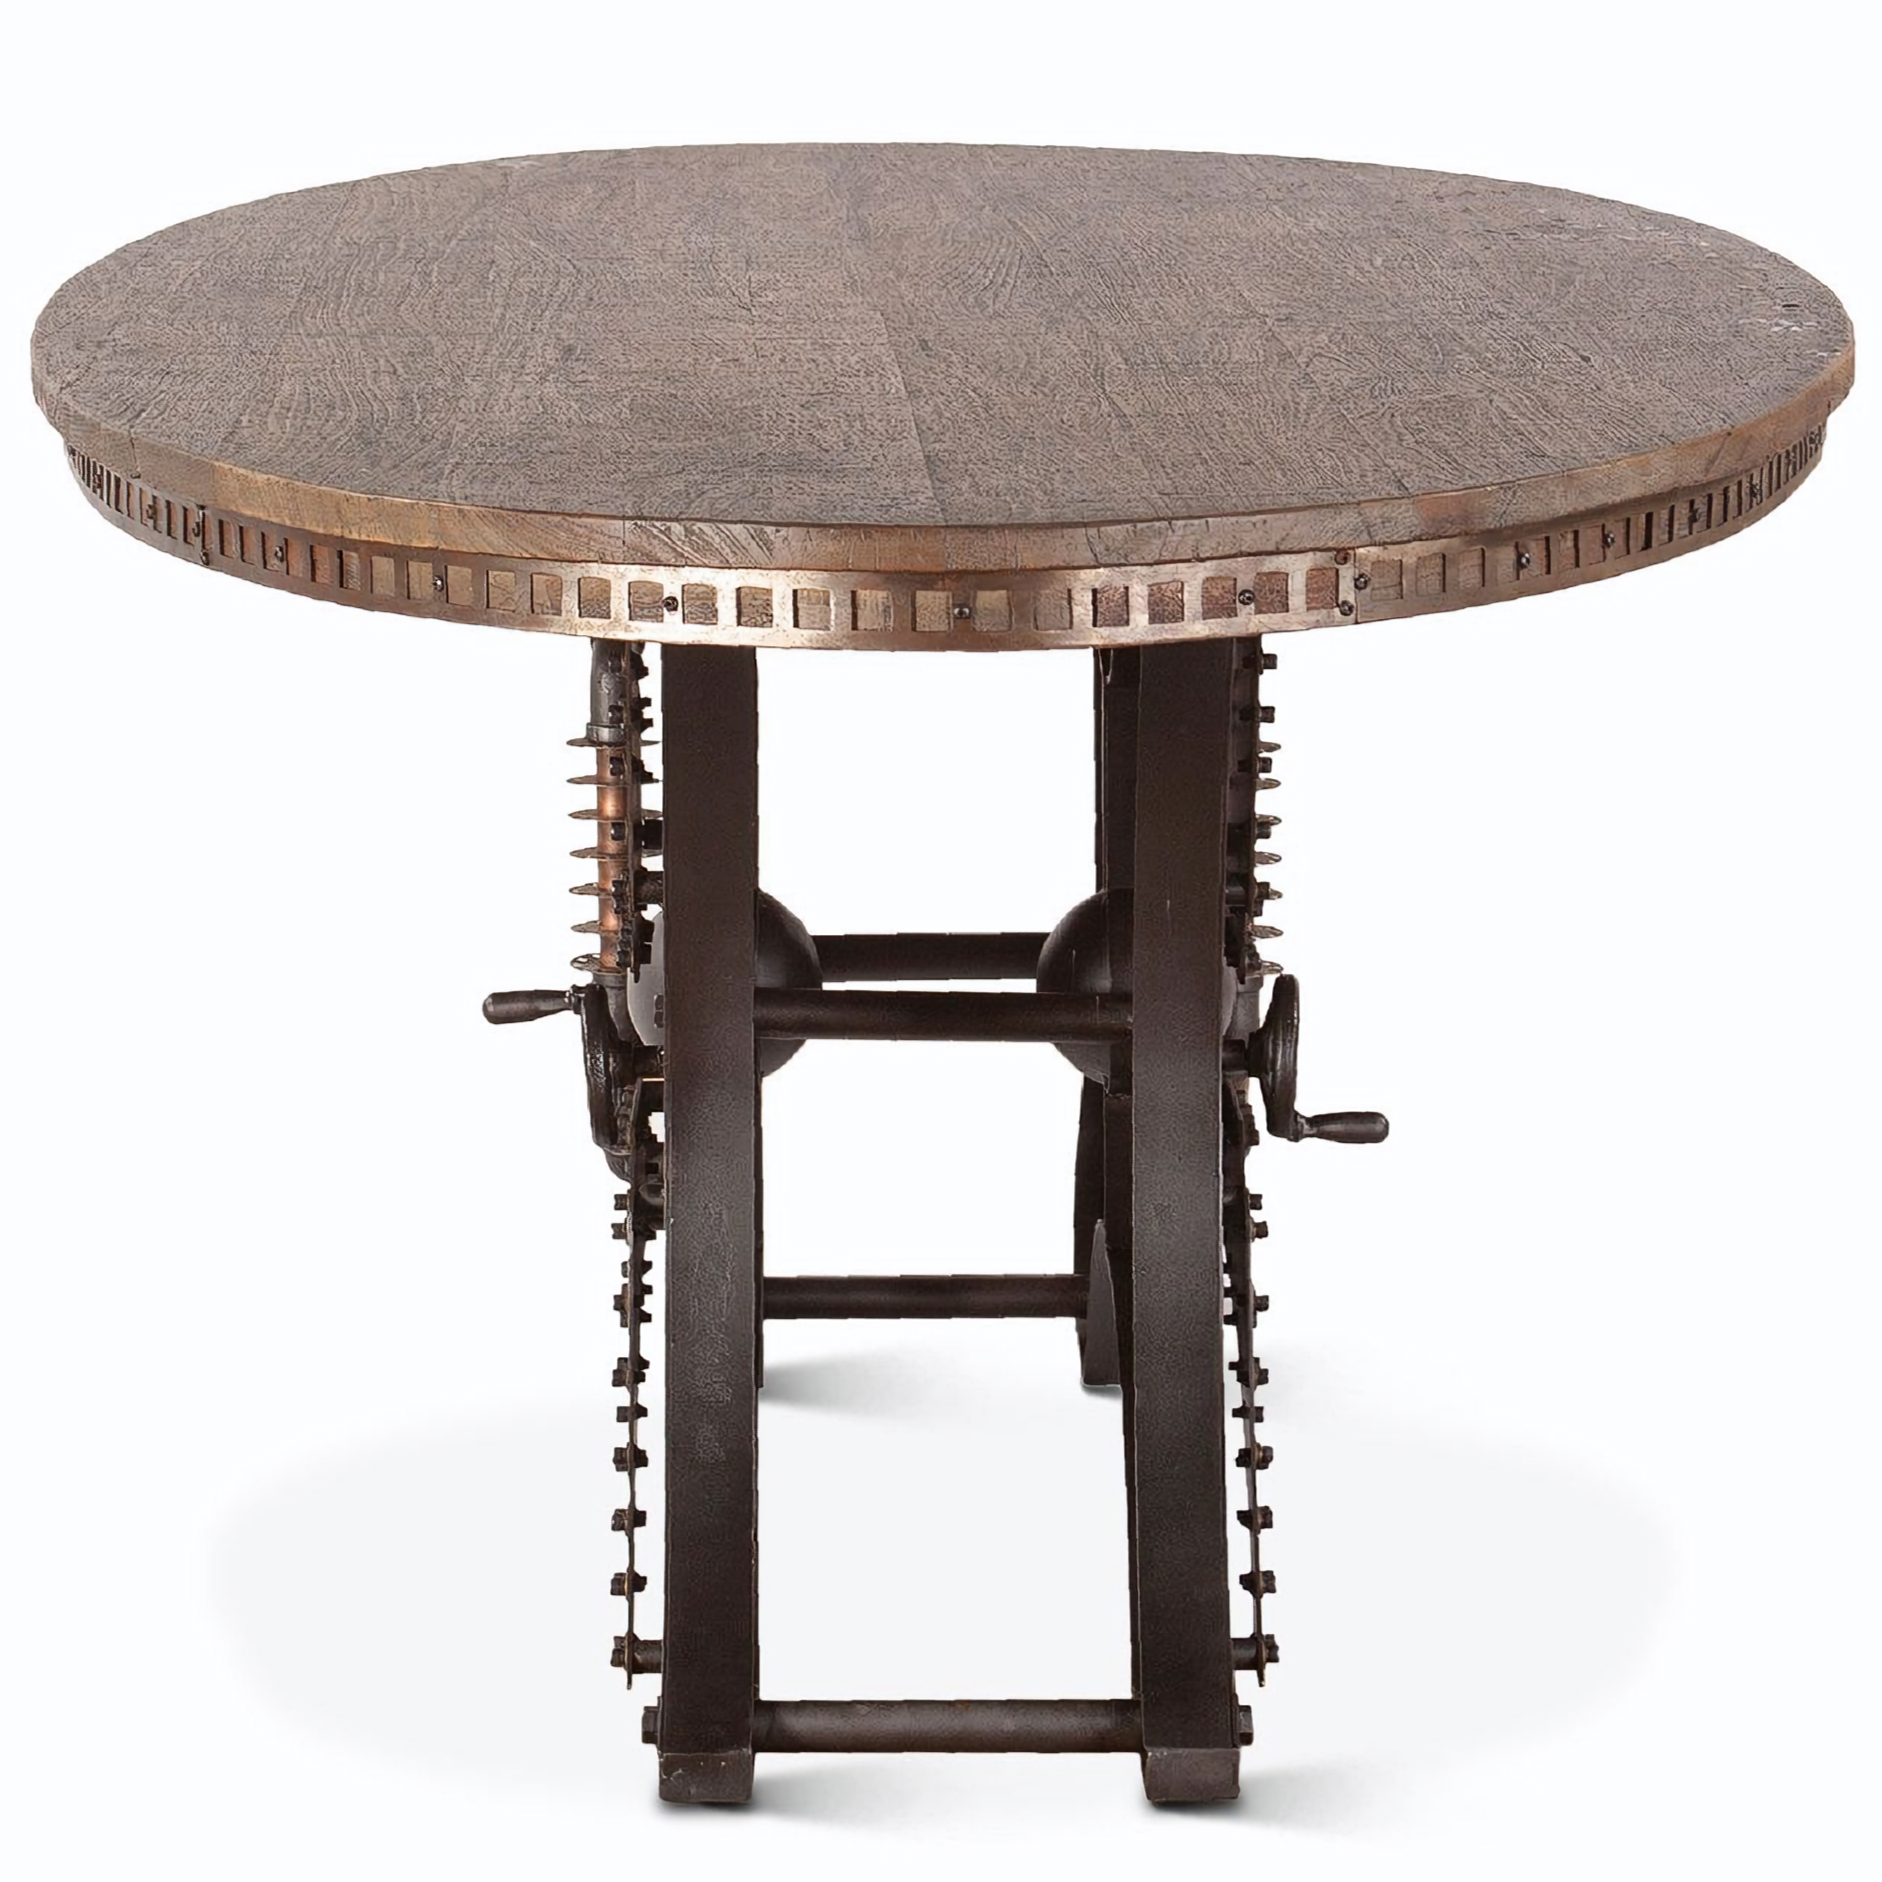 Eiffel Wood and Iron Oval Dining Table